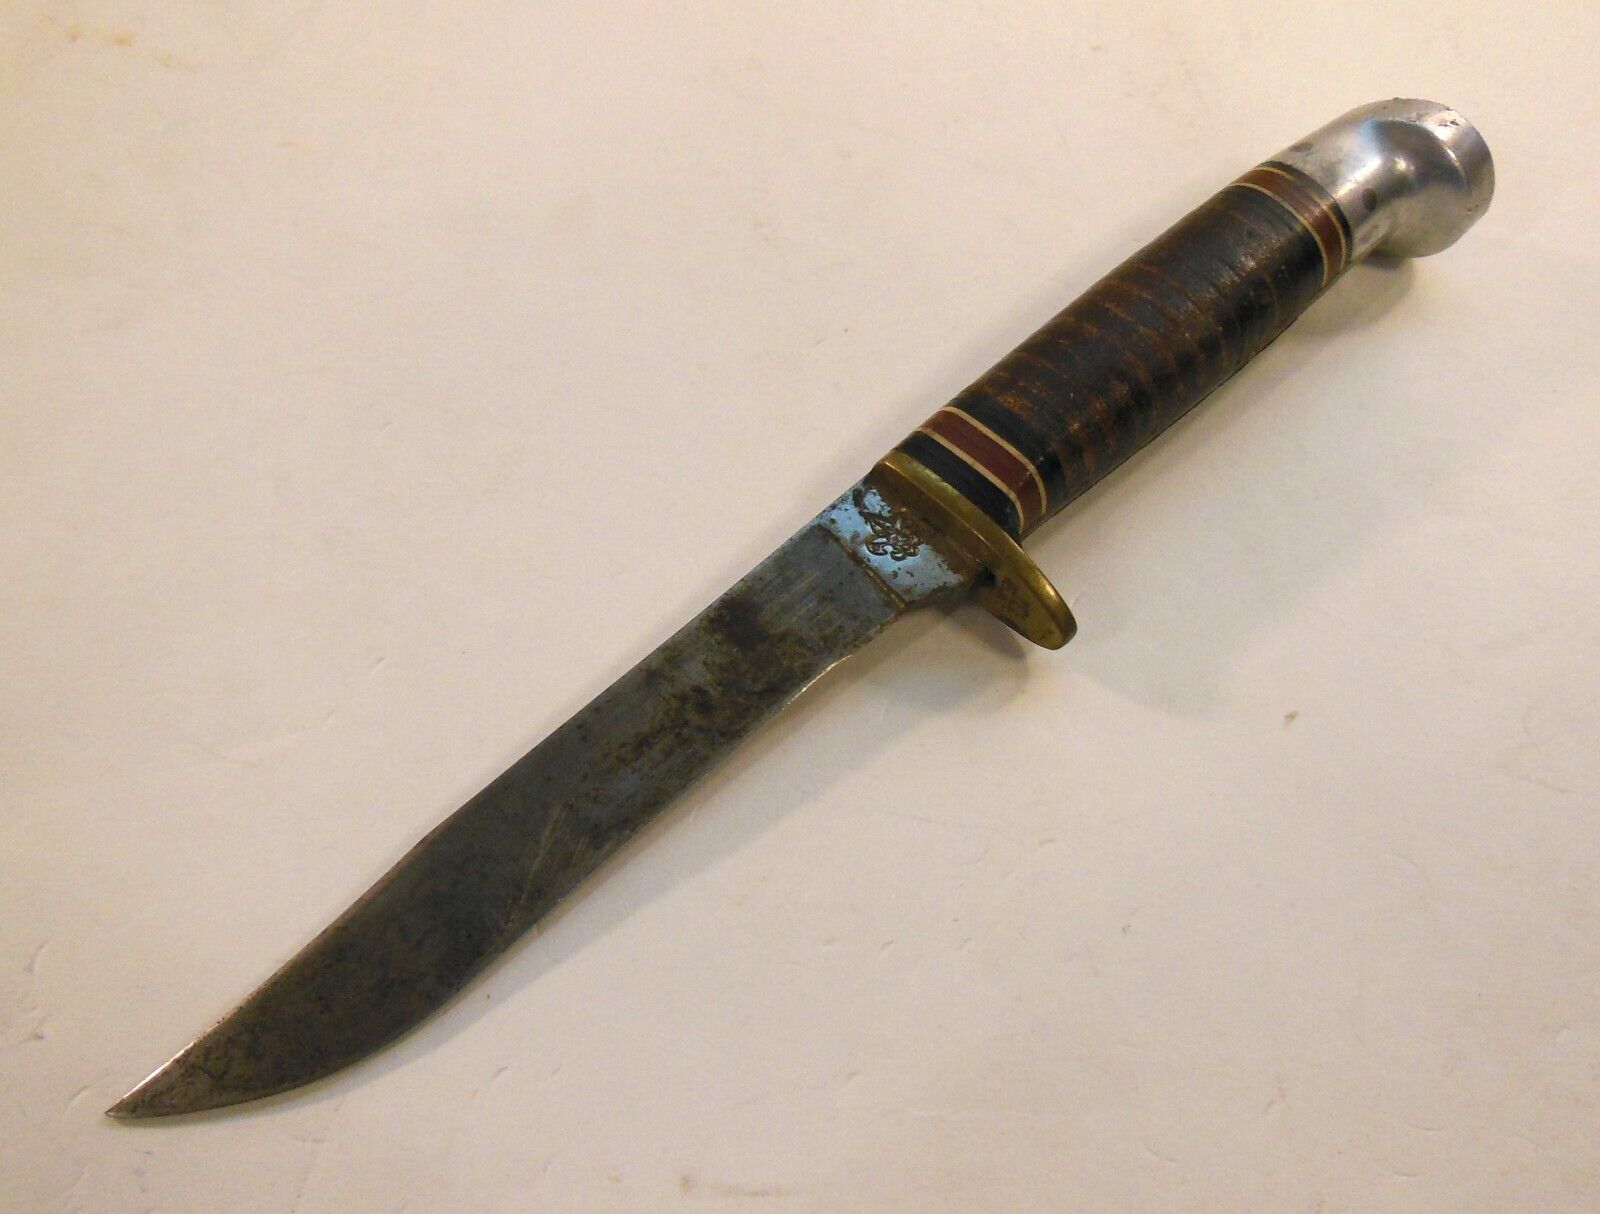 Vintage BOY SCOUTS OF AMERICA Hunting Knife with Stacked Leather Handle / Grip